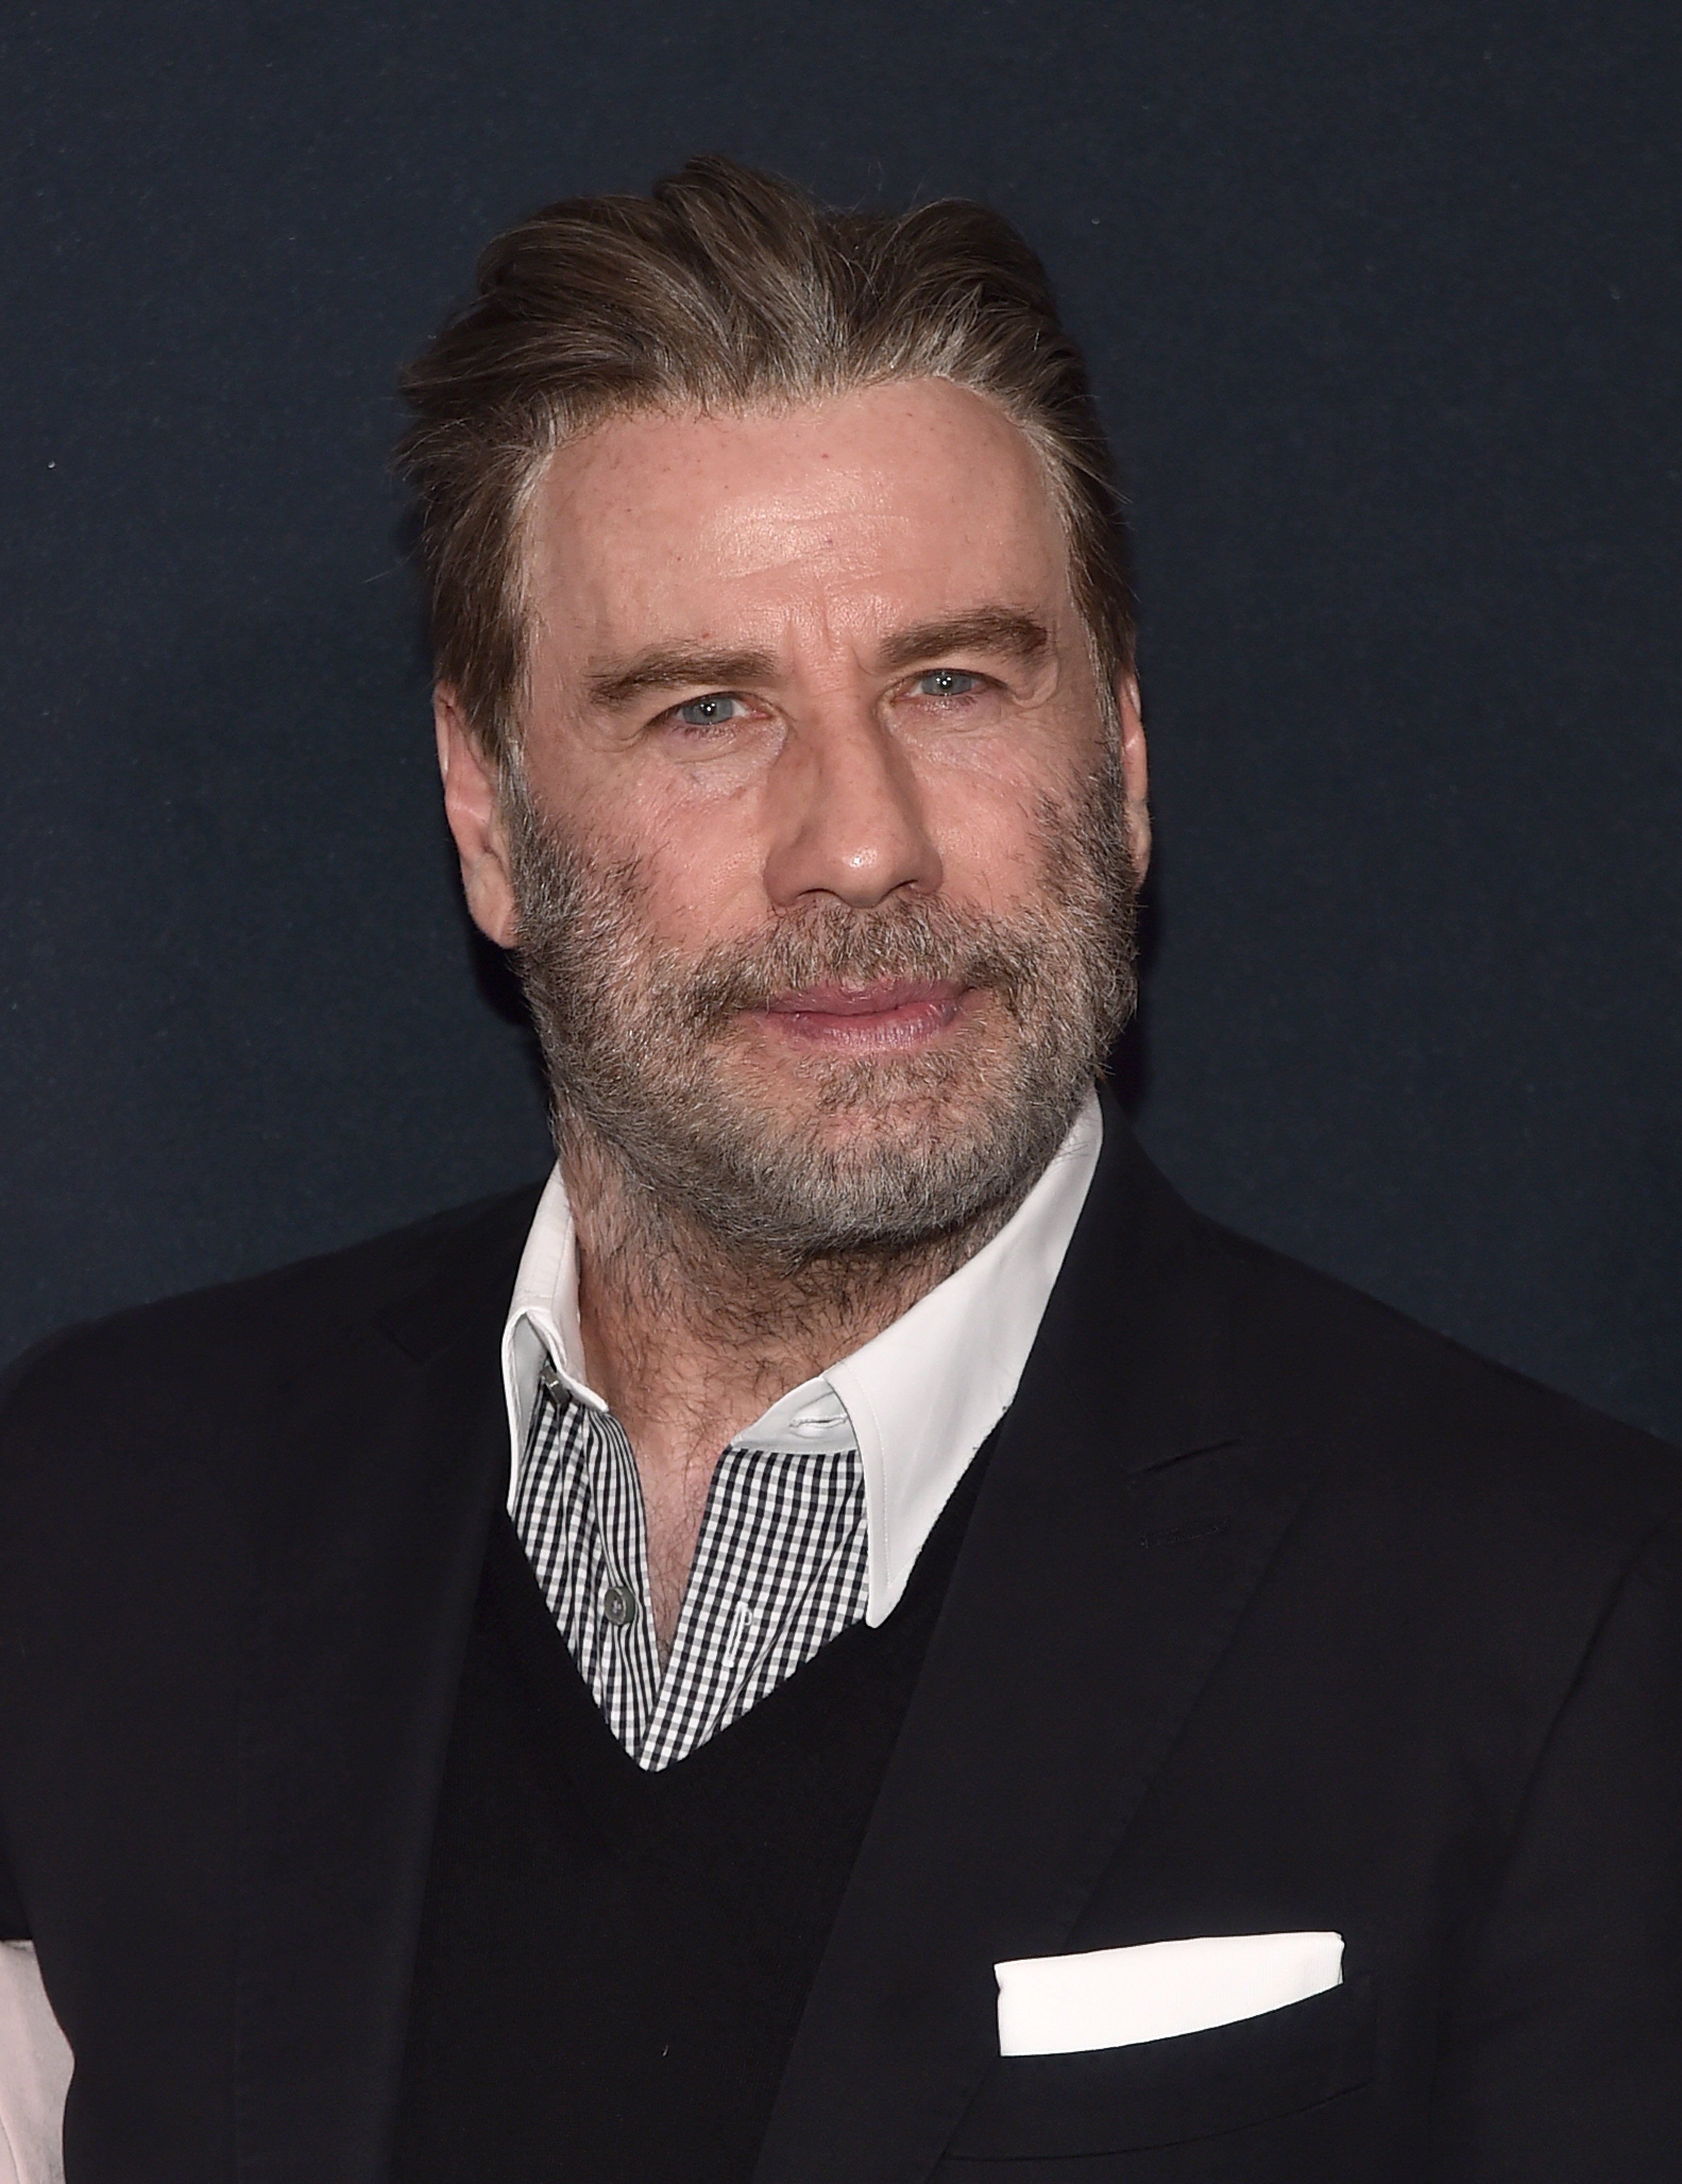 John Travolta Shares Rare Childhood Photo And Opens Up About His Second Career